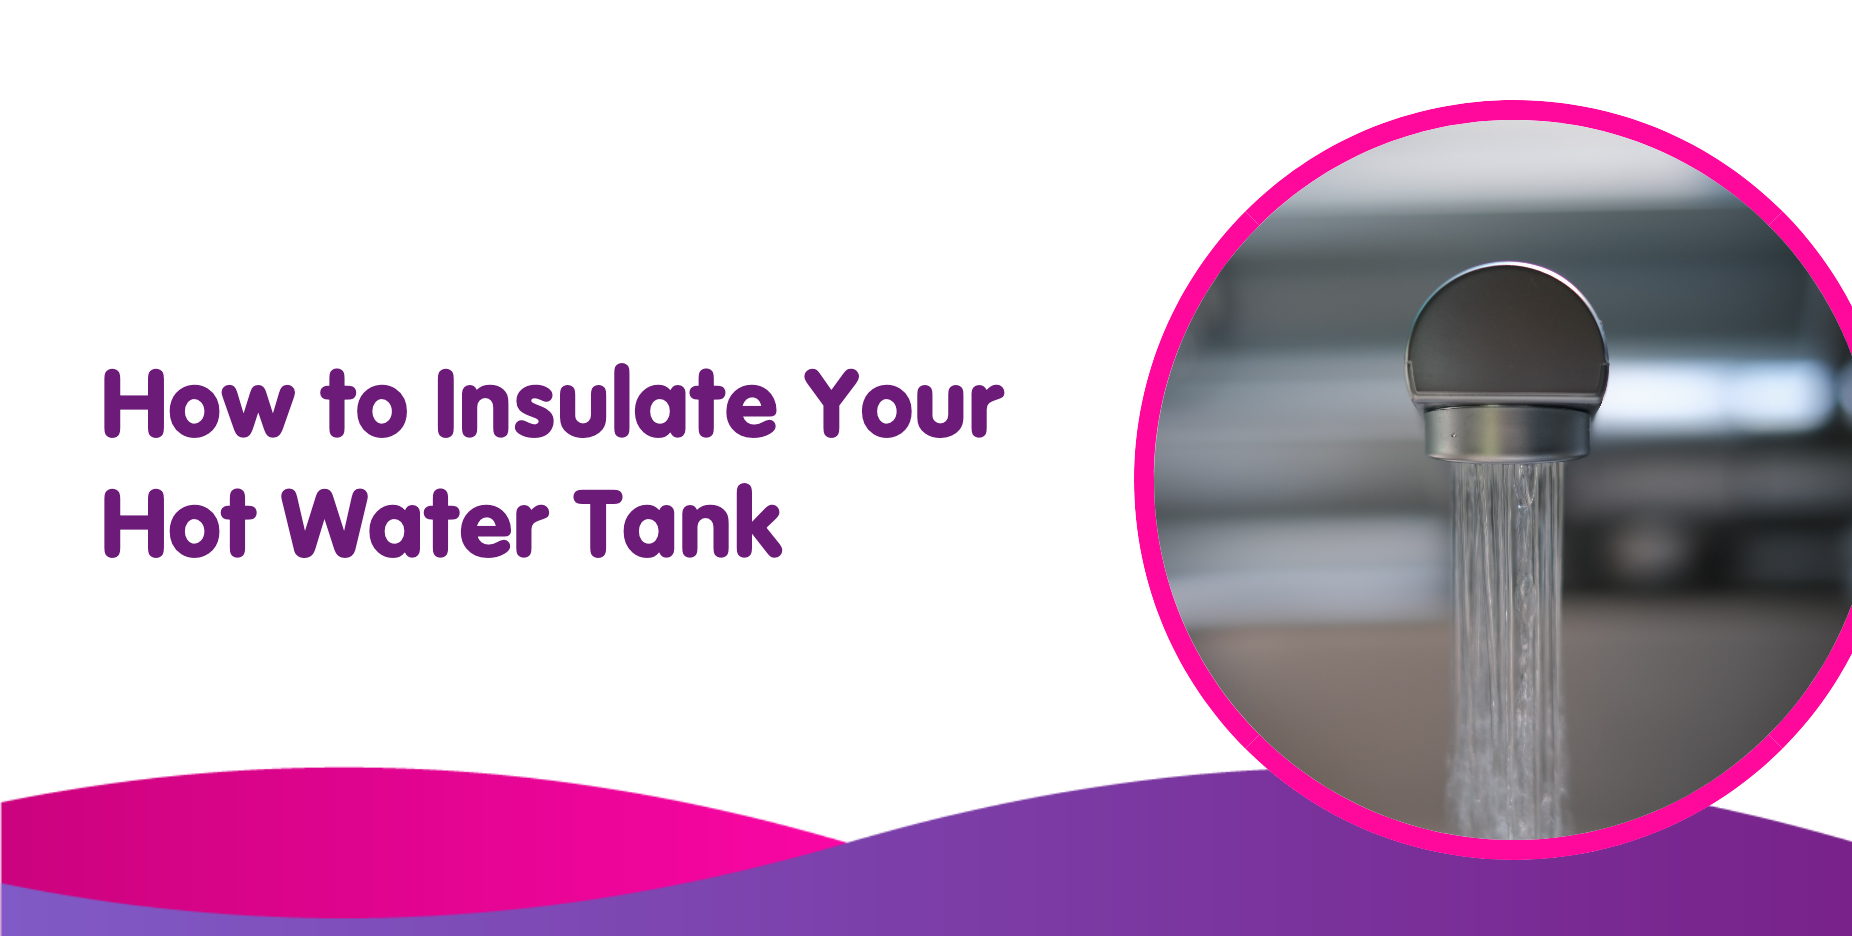 How To Insulate A Hot Water Tank - Insulating Hot Water Cylinders